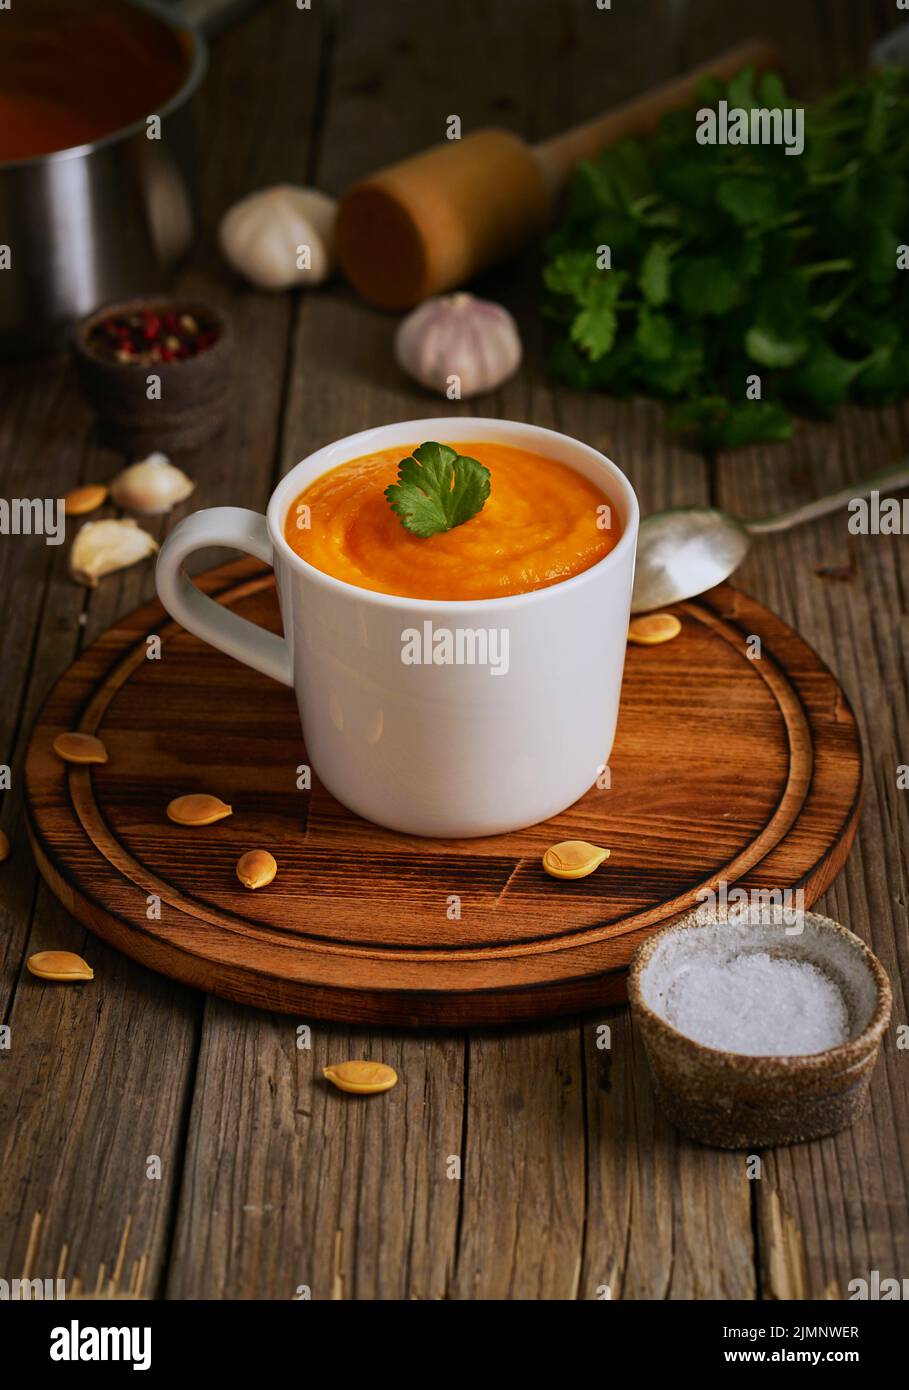 Pupmkin cream soup in cup on brown wooden table, vertical, side view. Dietary vegetarian puree on cutting board with parsley, ga Stock Photo